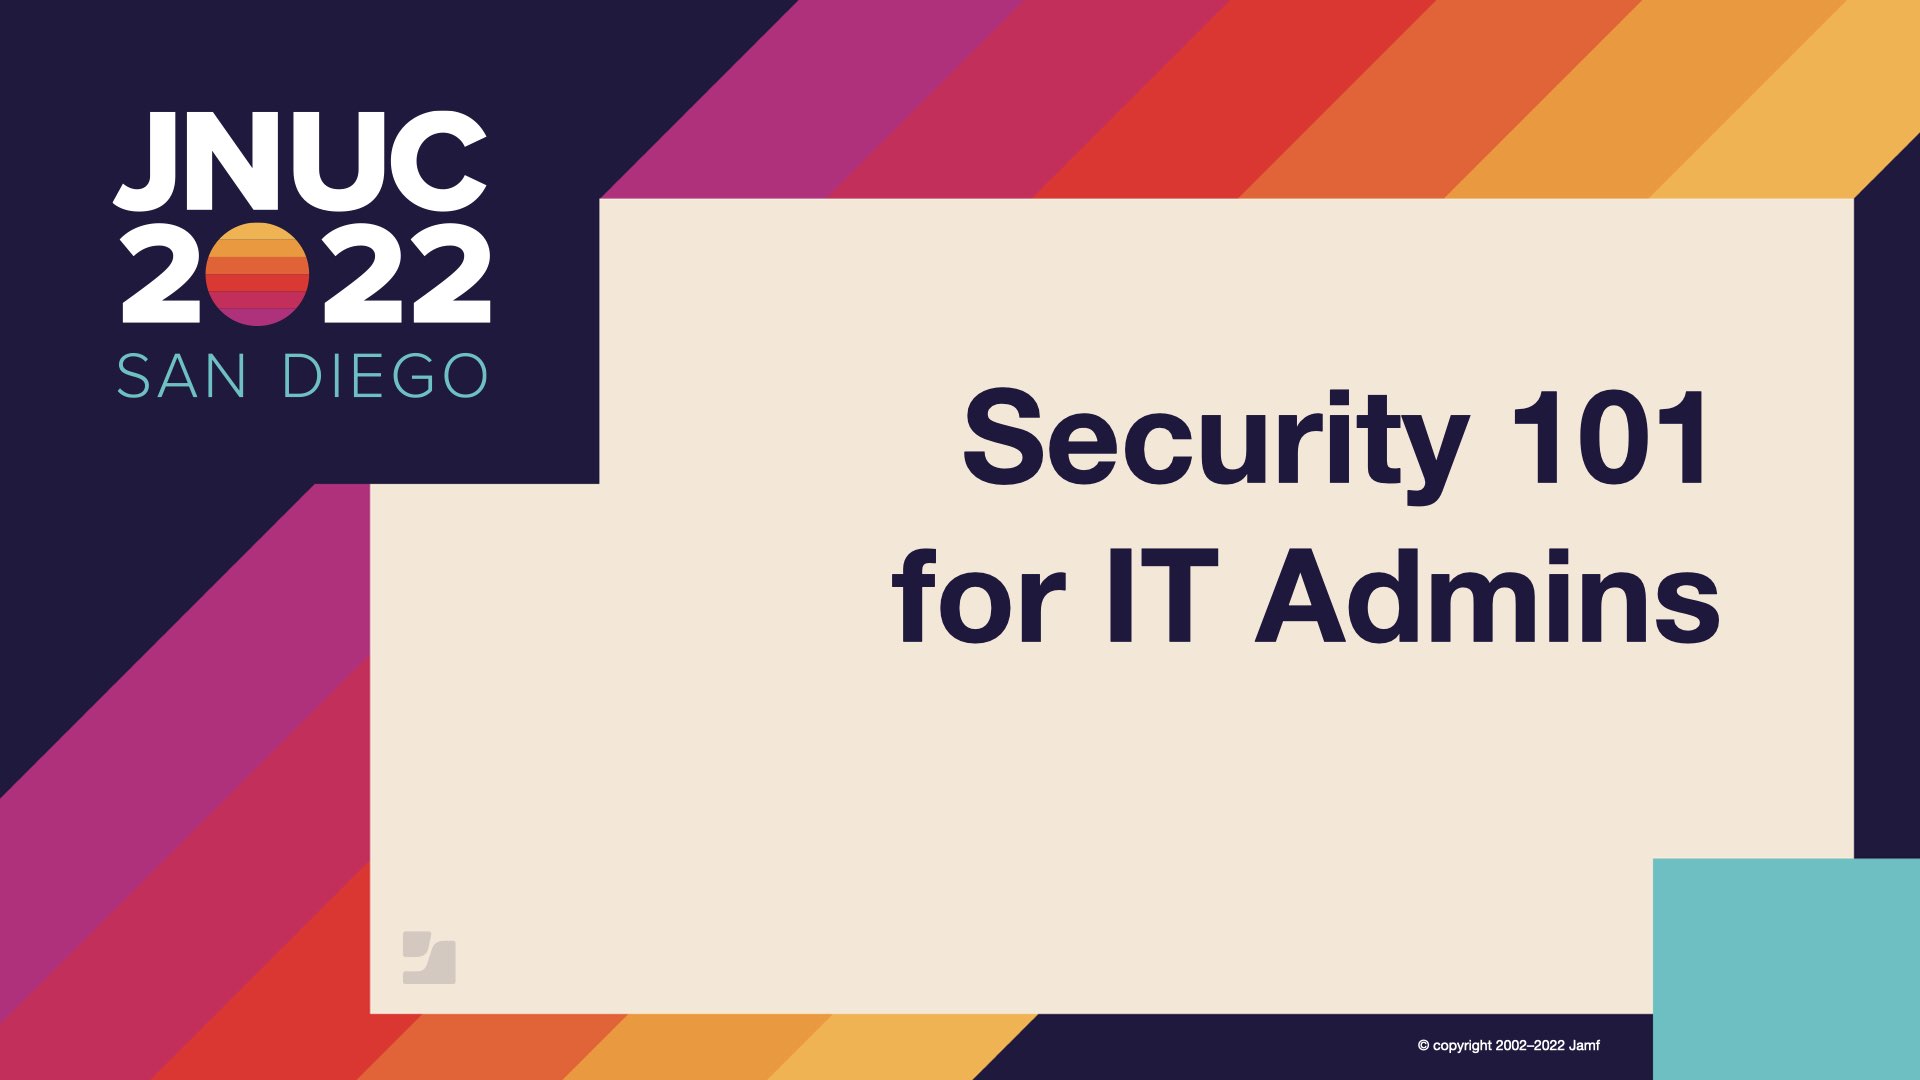 Security 101 for IT Admins